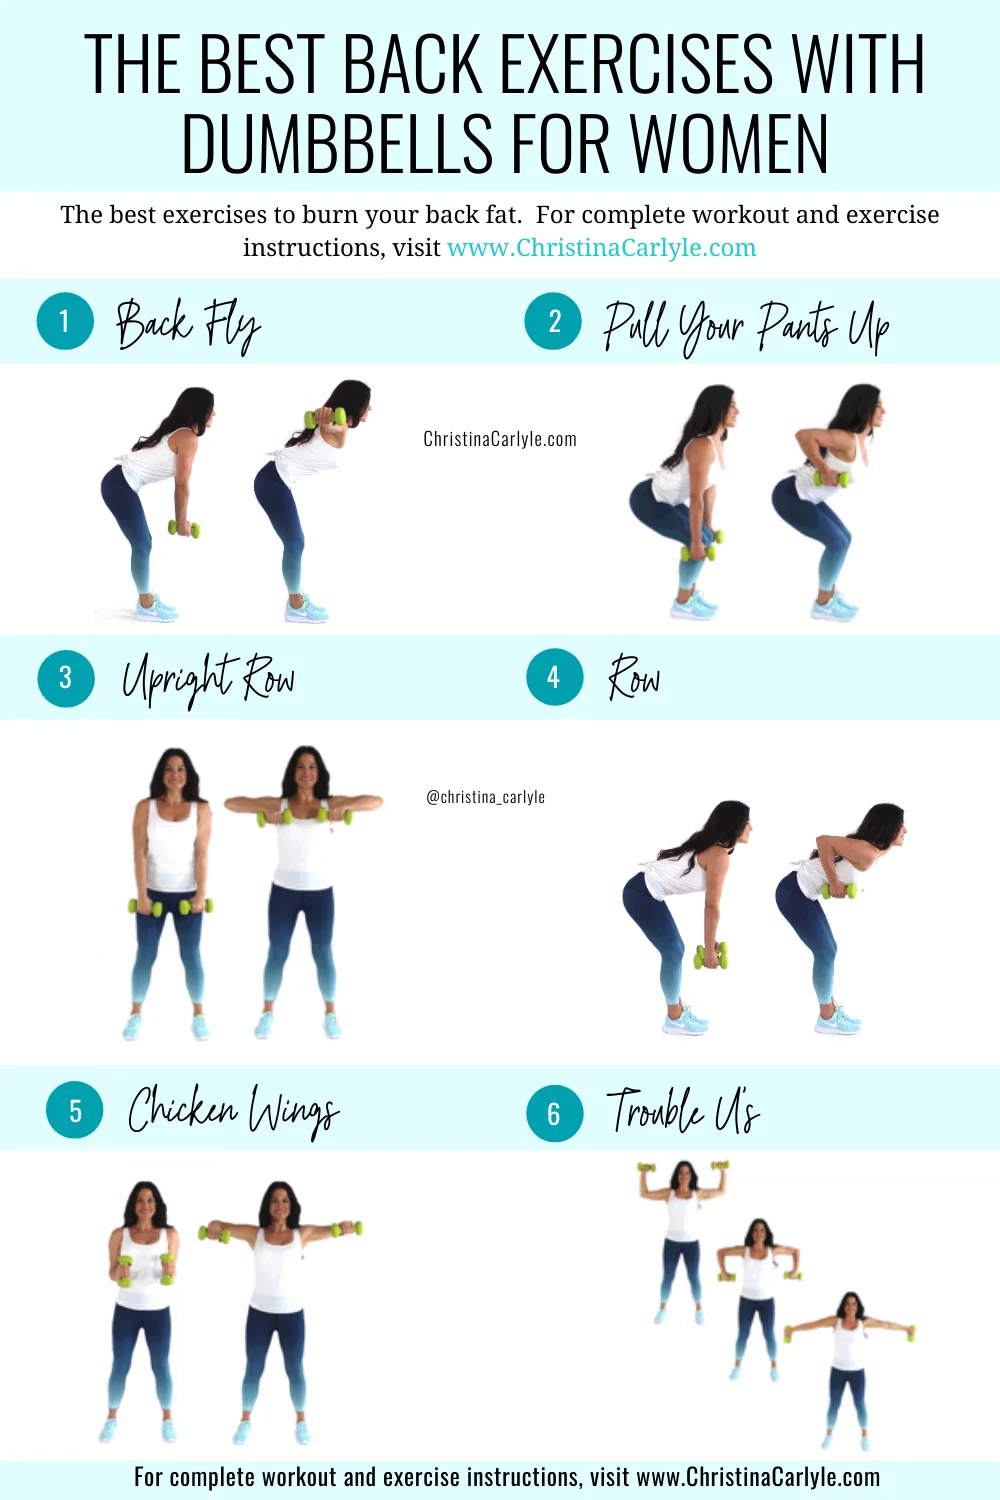 Back Fat: How To Get Rid of Back Fat: Exercises And Workouts To